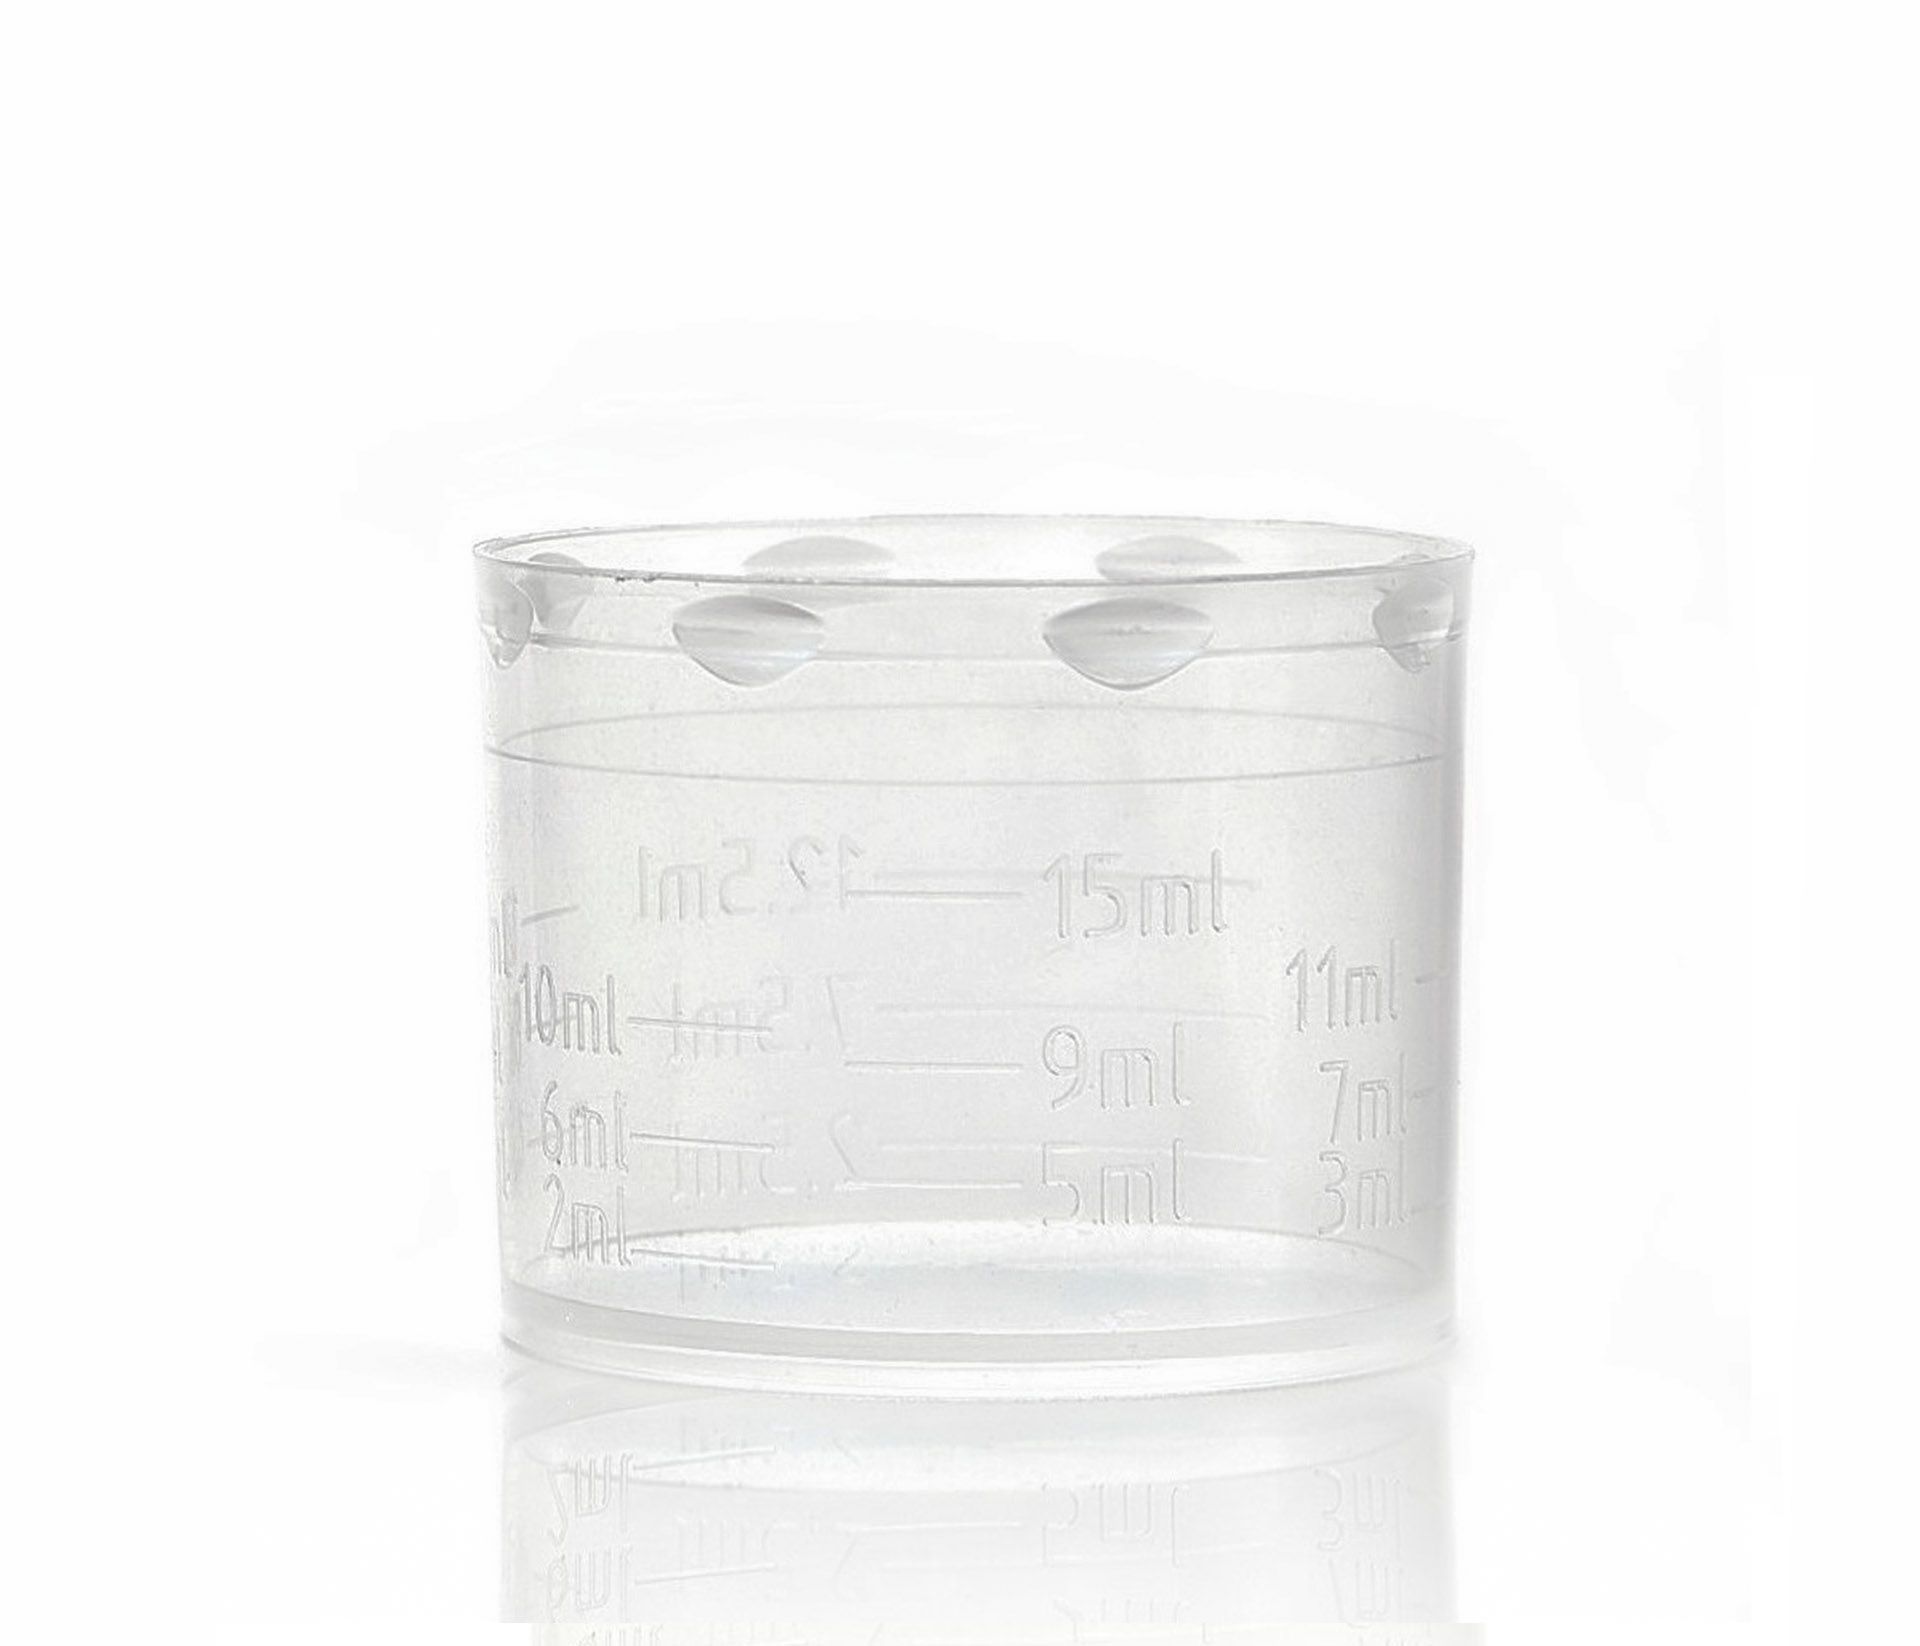 Measuring cup SD-15 provides graduations: 15 – 12,5 – 12 – 11 – 10 – 9 – 8 – 7,5 – 7 – 6 – 5 – 4 – 3 – 2,5 – 2ml. by Pack Store Europe, packstore.eu